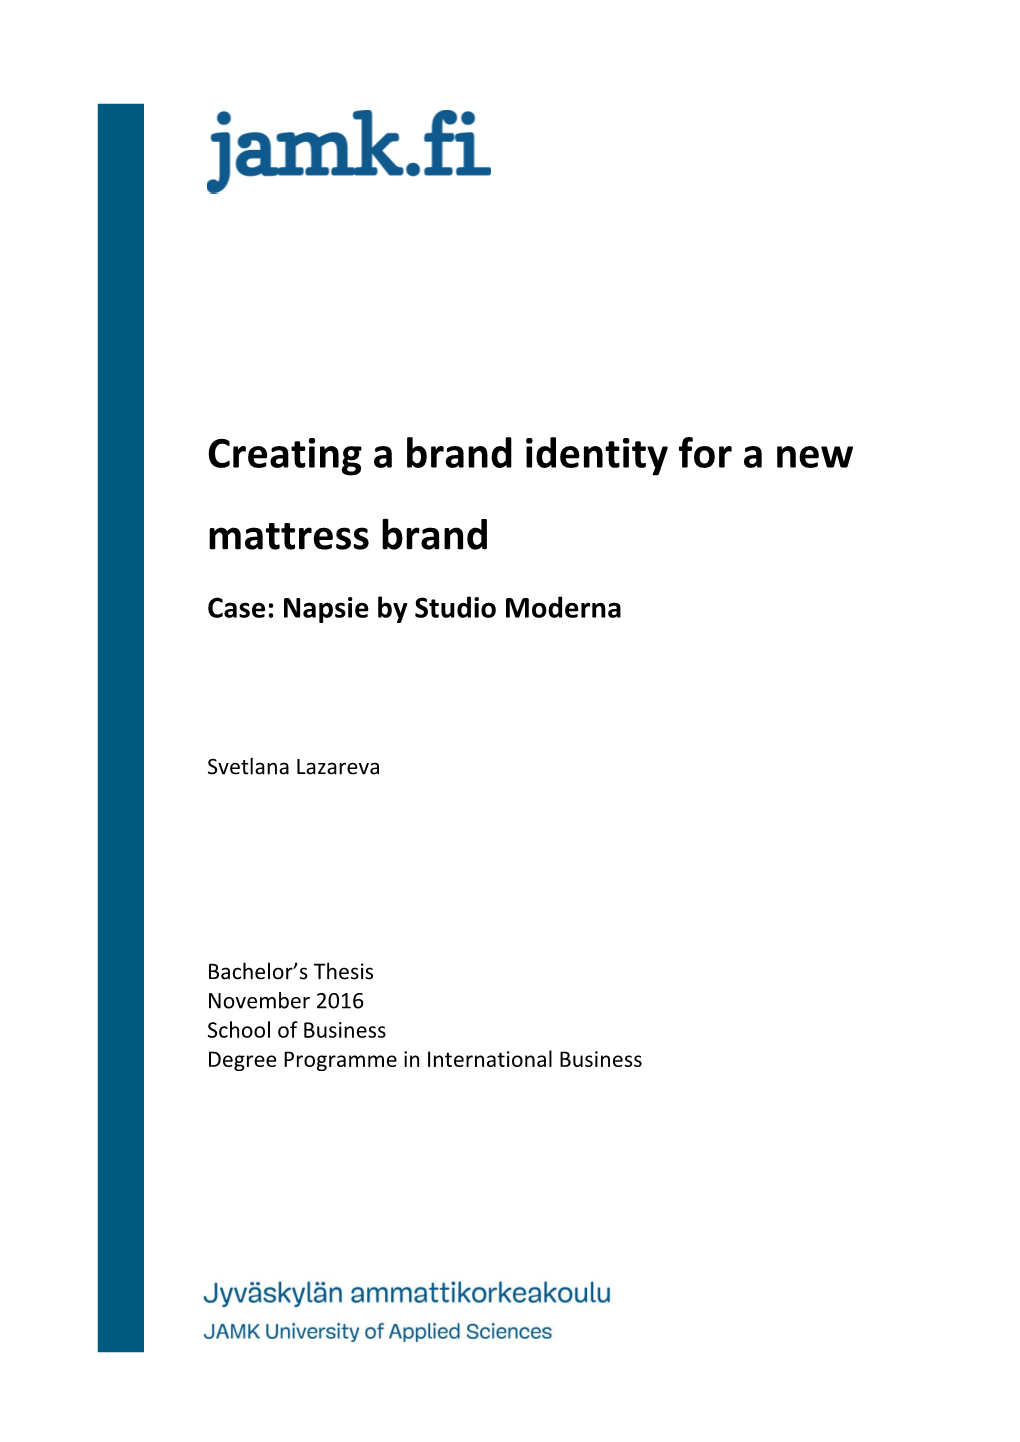 Creating a Brand Identity for a New Mattress Brand